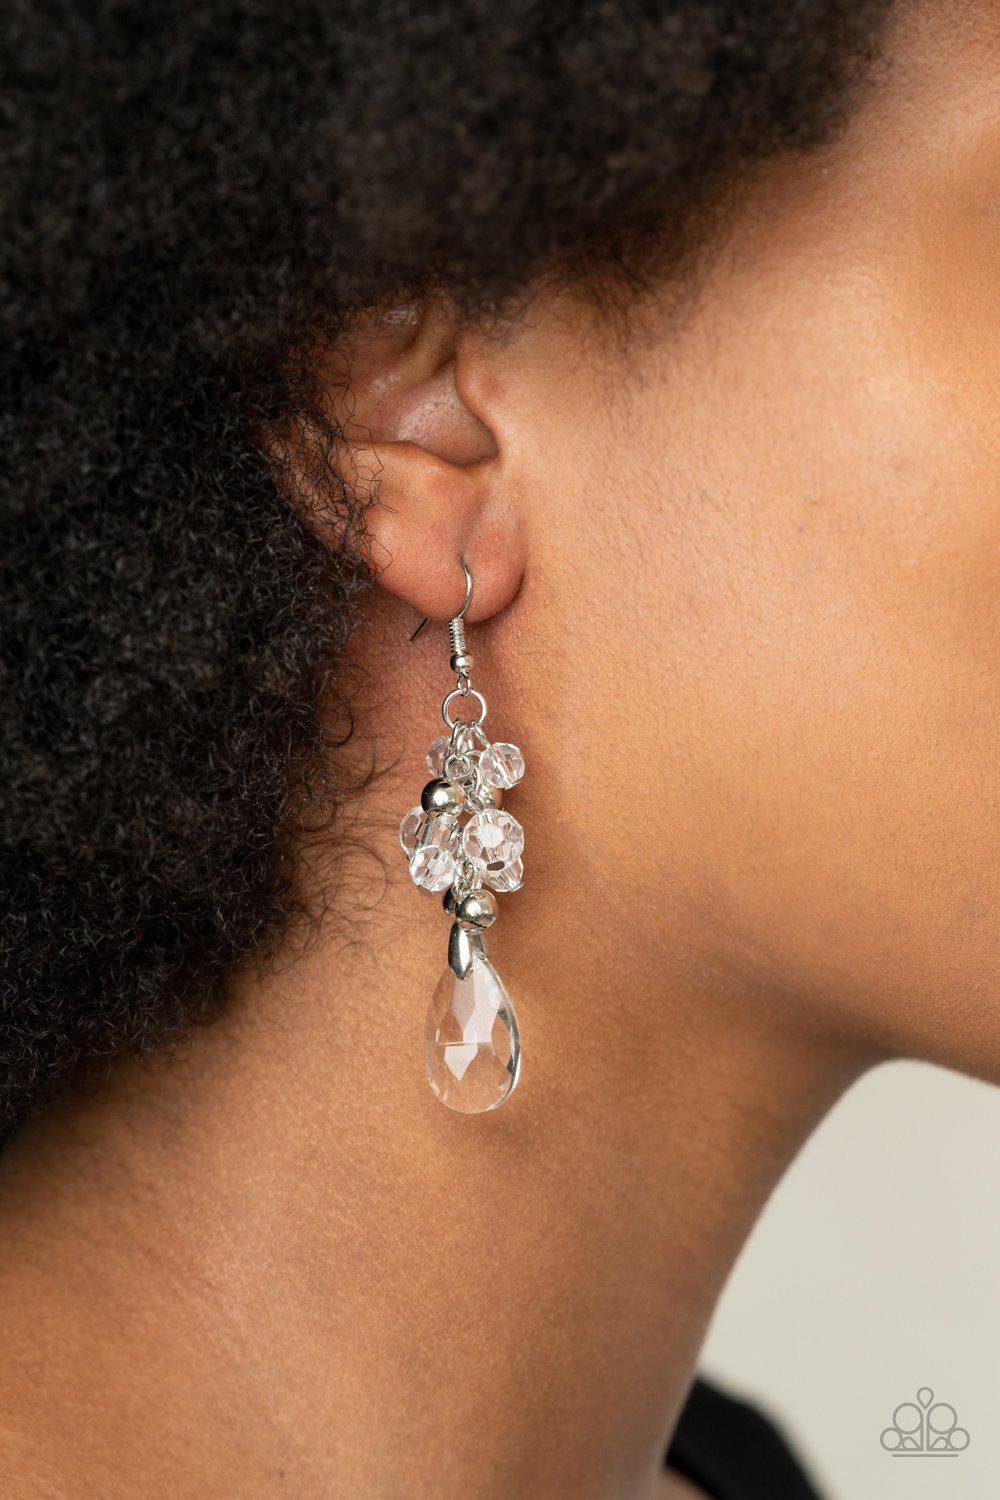 Before and AFTERGLOW White and Silver Earrings - Paparazzi Accessories- model - CarasShop.com - $5 Jewelry by Cara Jewels